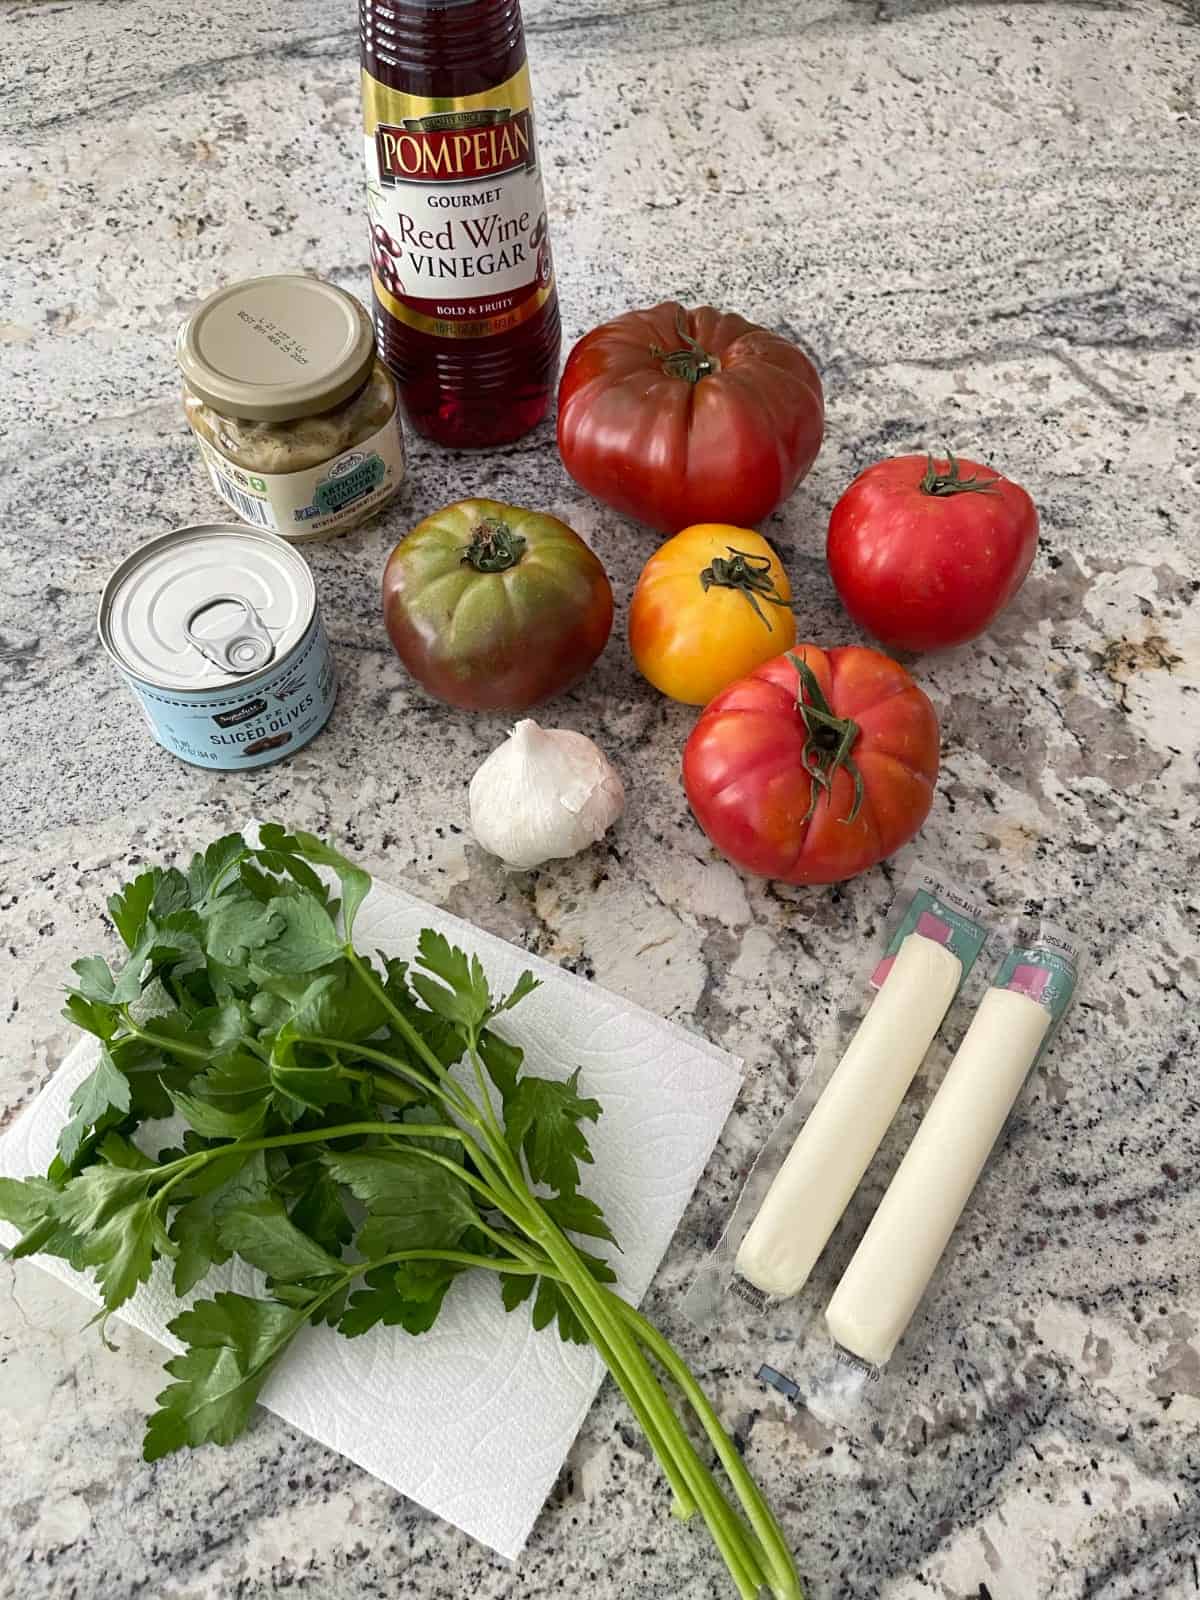 Ingredients including red wine vinegar, fresh tomatoes, olives, artichoke quarters, parsley, string cheese and garlic.